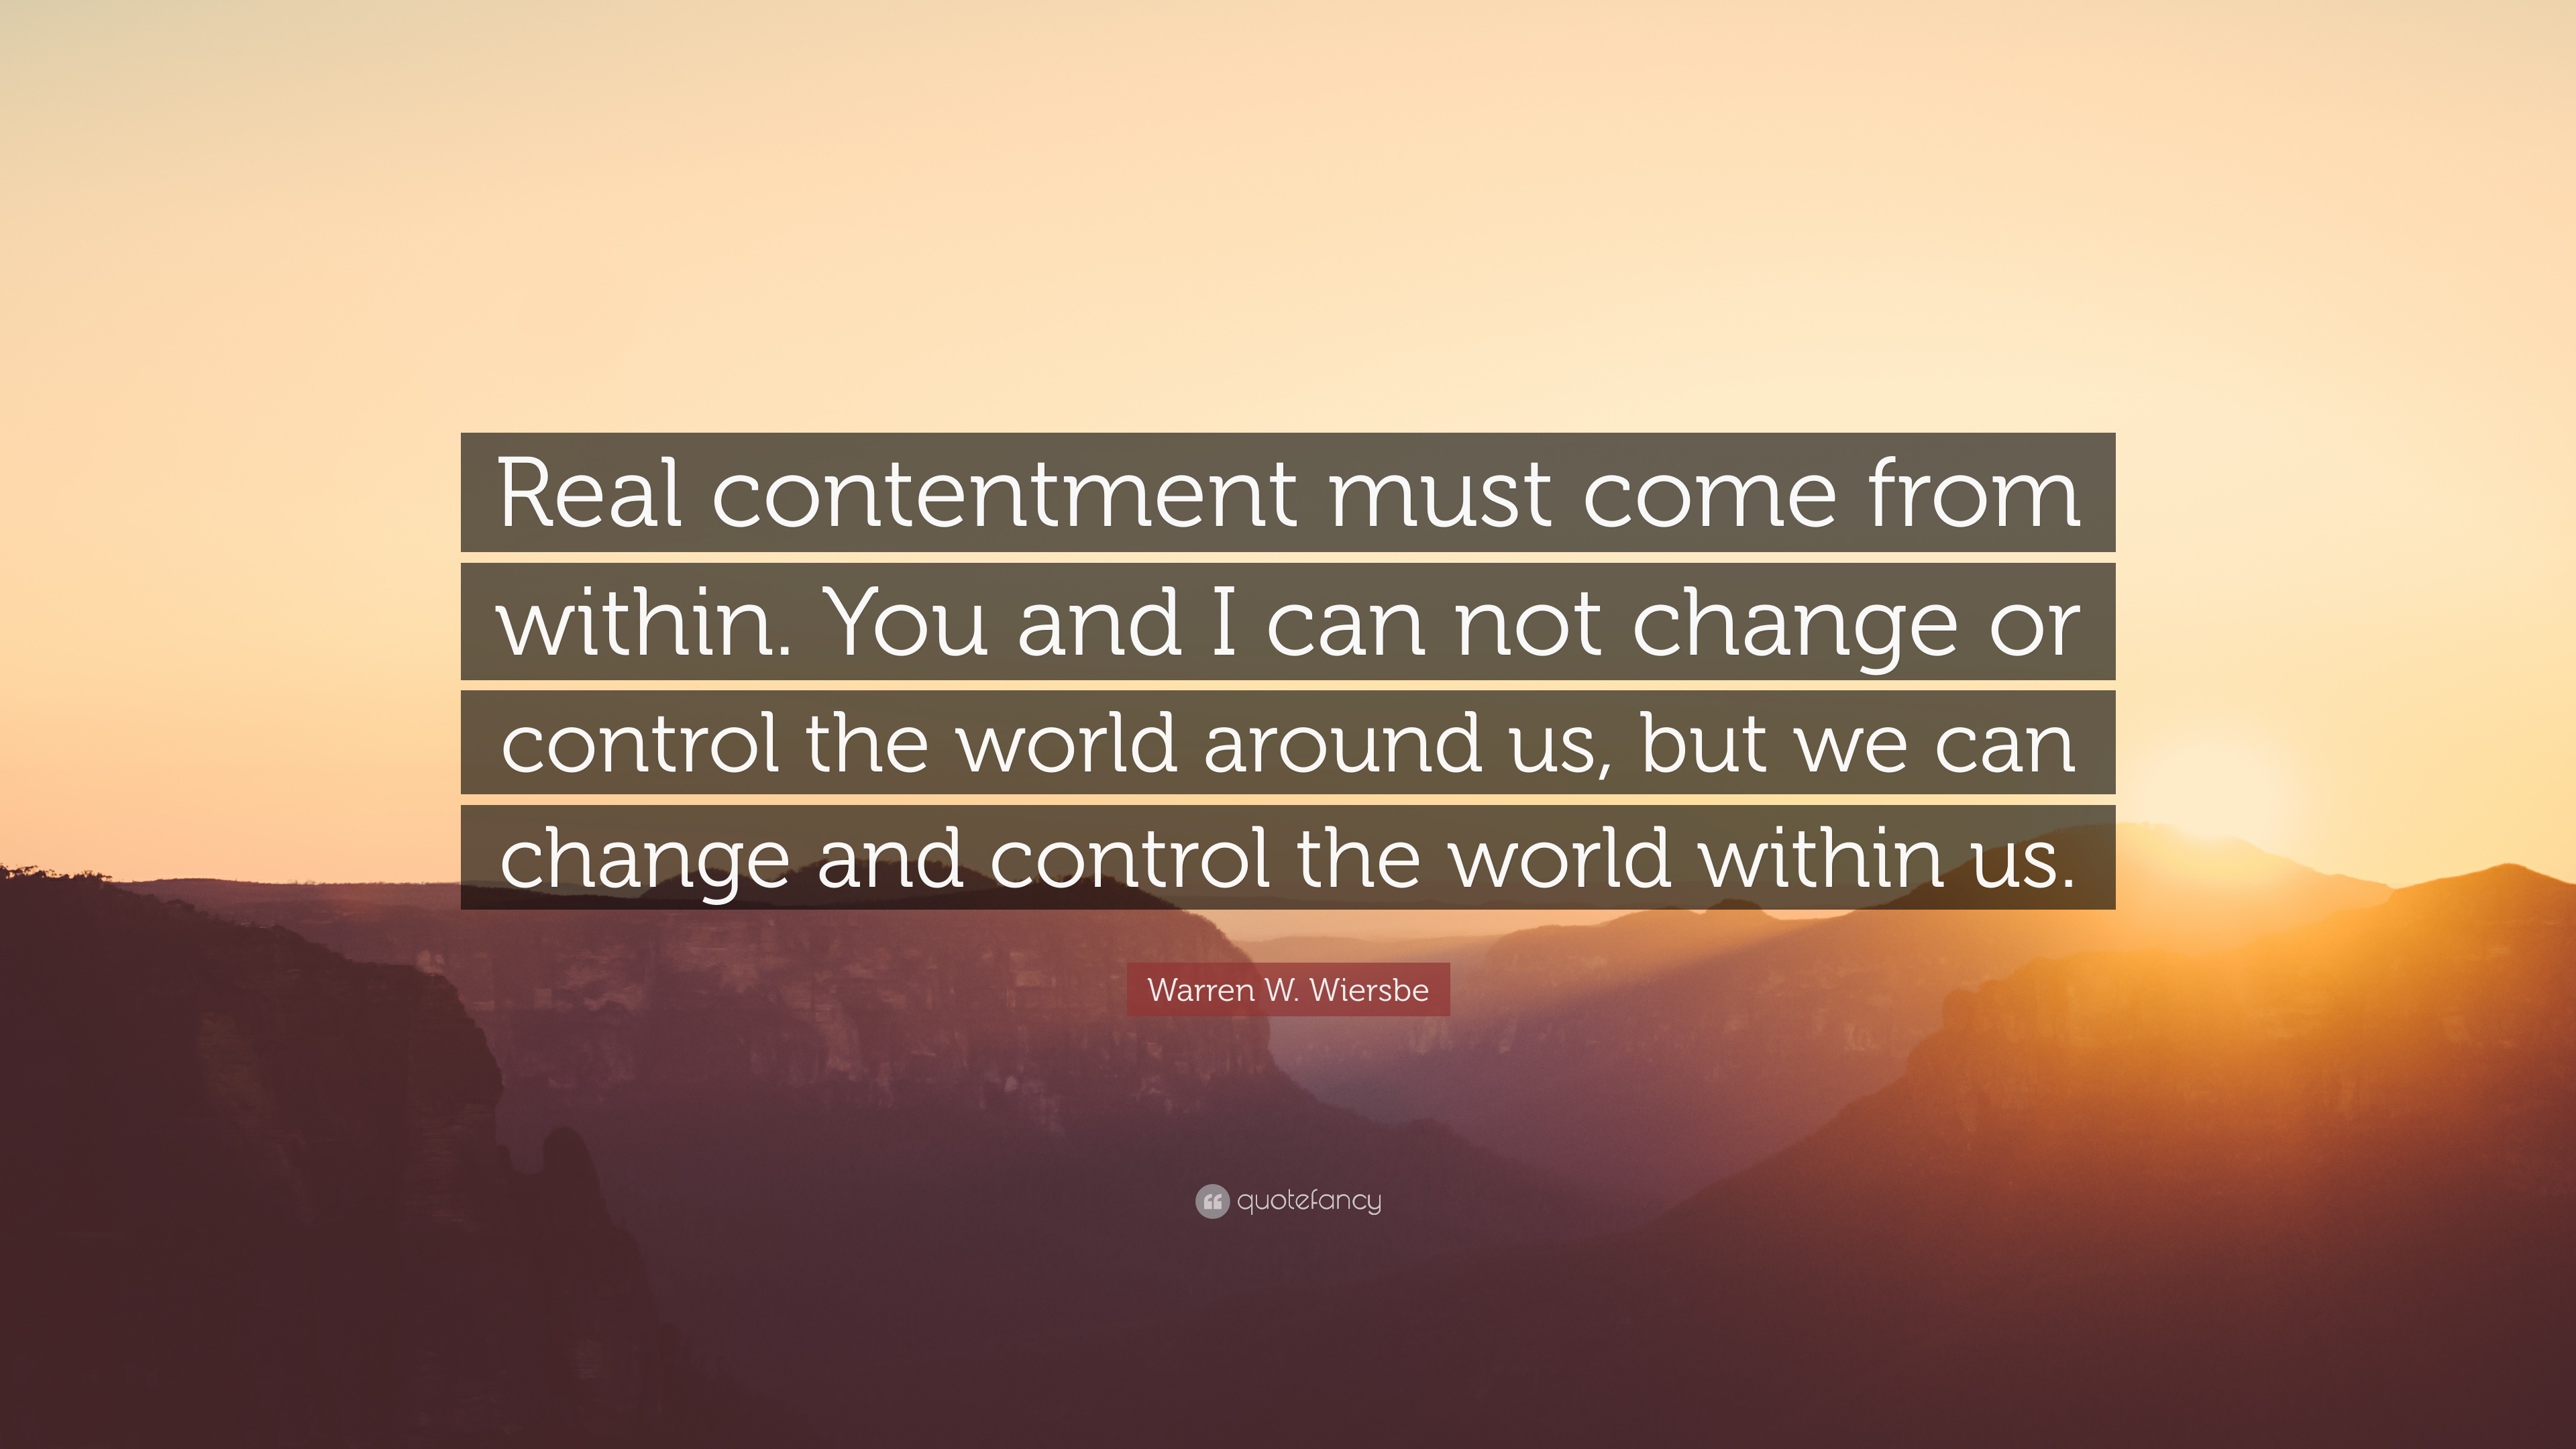 Warren W Wiersbe Quote Real Contentment Must Come From Within You And I Can Not Change Or Control The World Around Us But We Can Change And C 12 Wallpapers Quotefancy